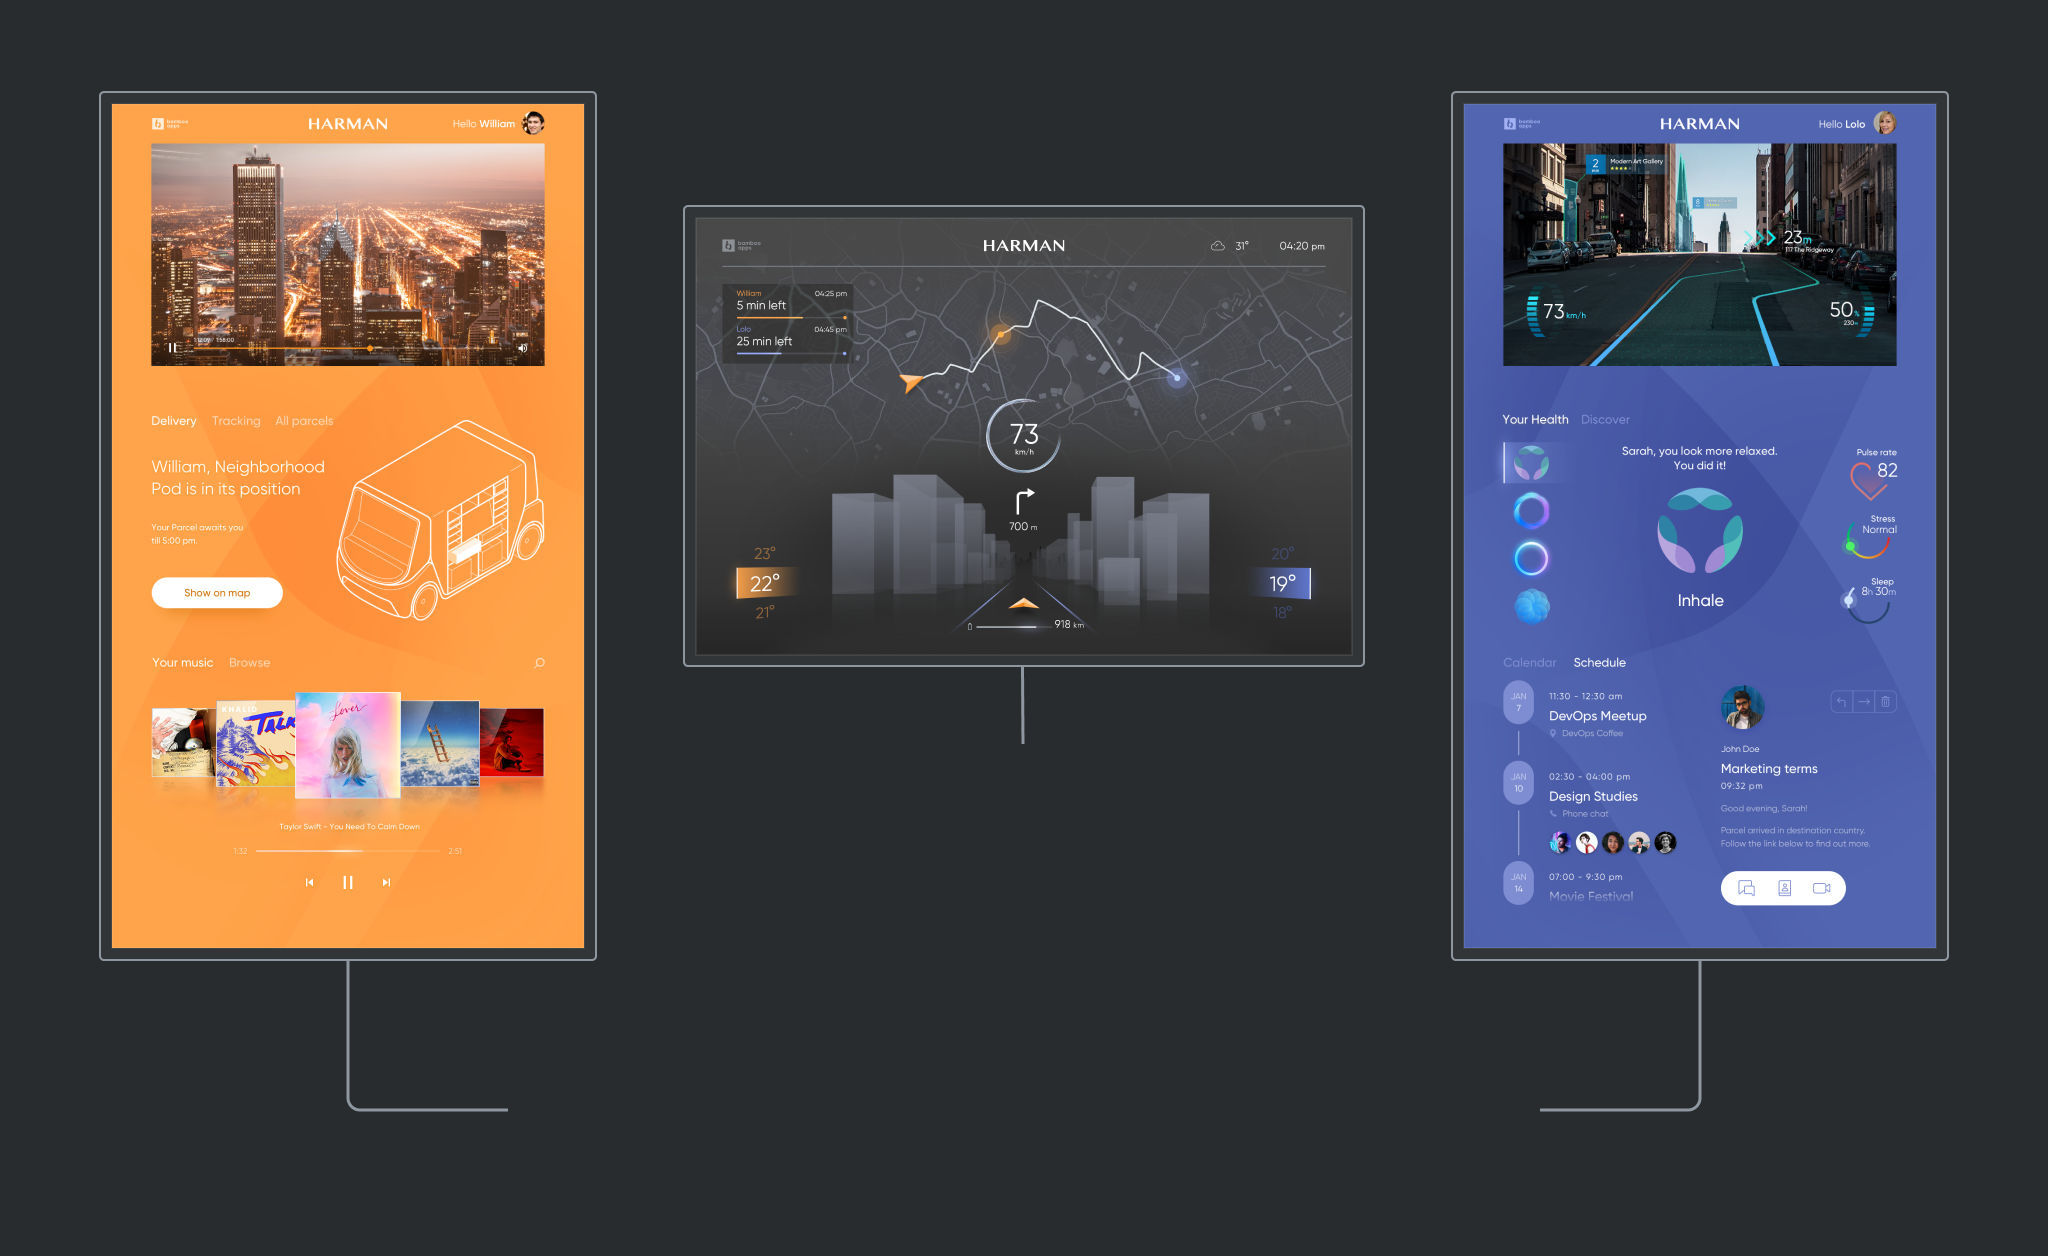 UX/UI design for a digital cockpit that consists of a shared area and two personalized screens.